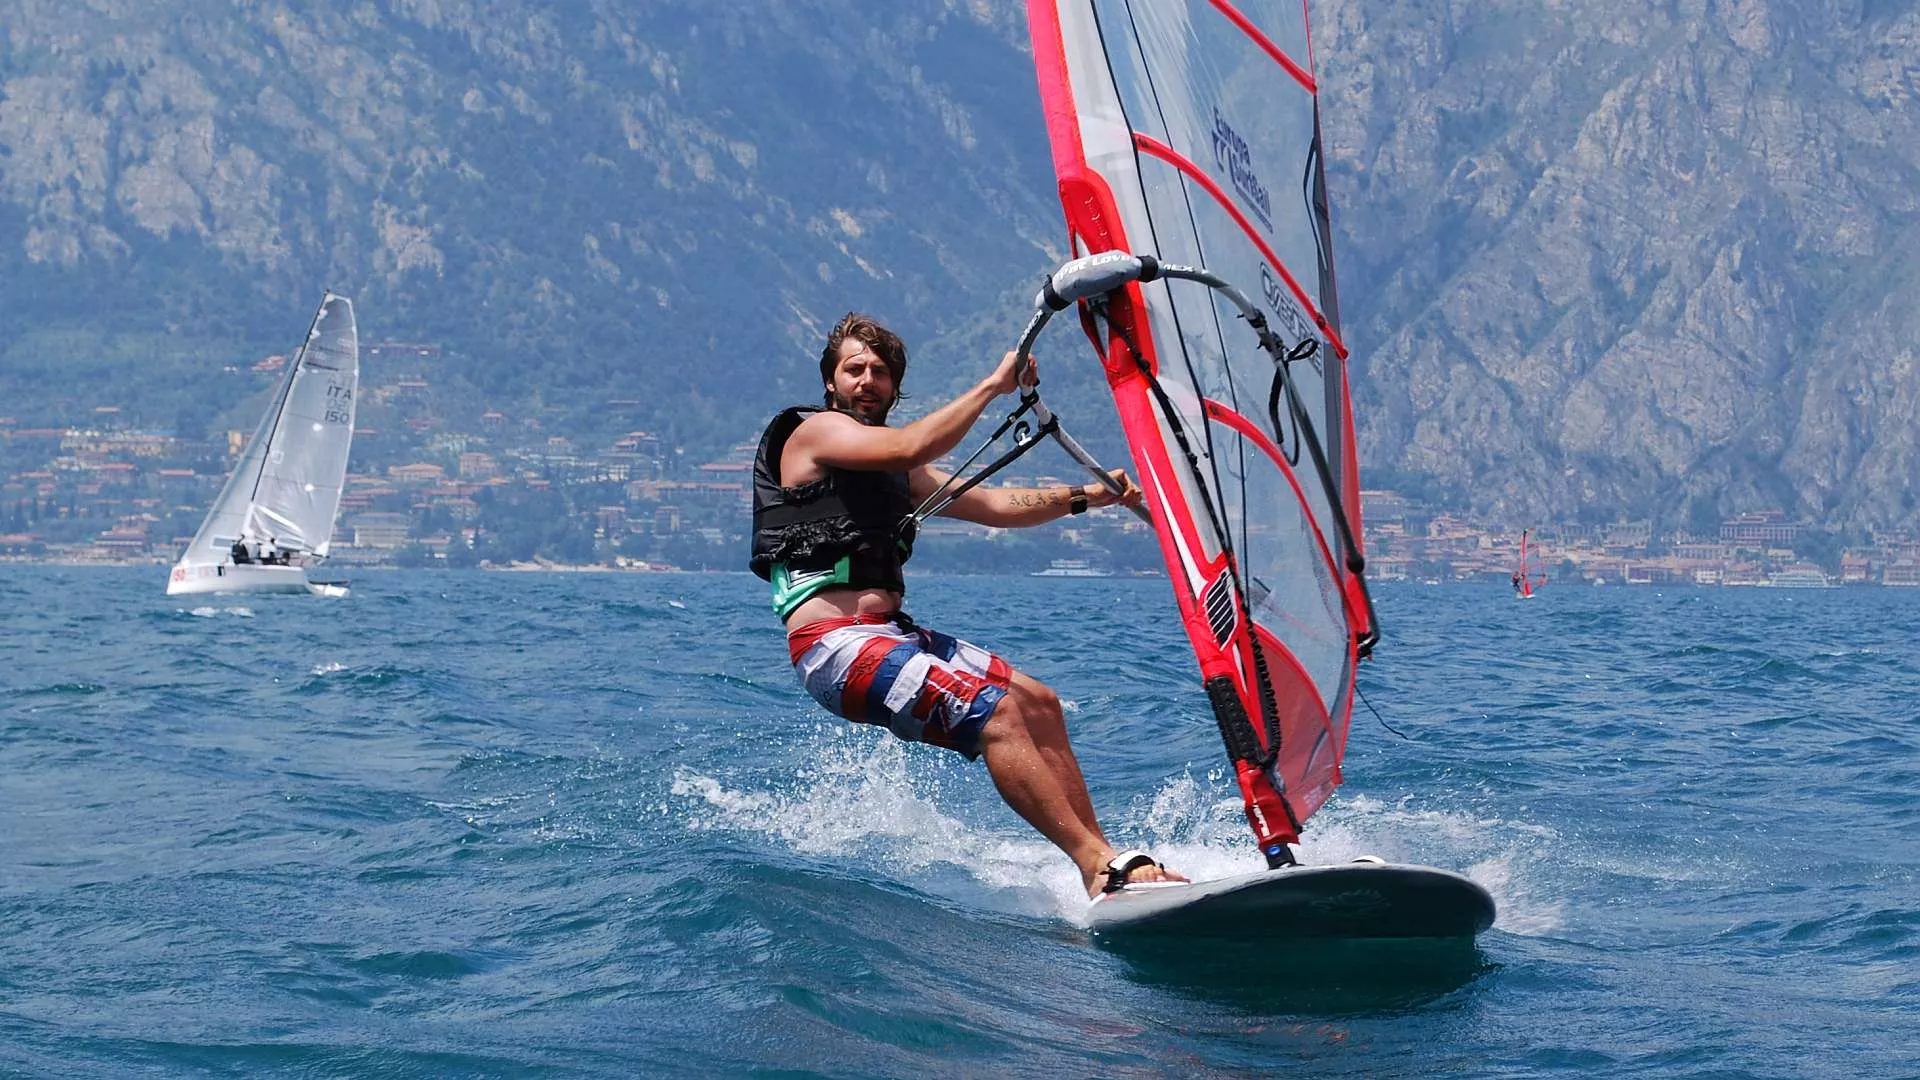 Europa Surf and Sail in Italy, Europe | Surfing,Kitesurfing,Windsurfing - Rated 1.3